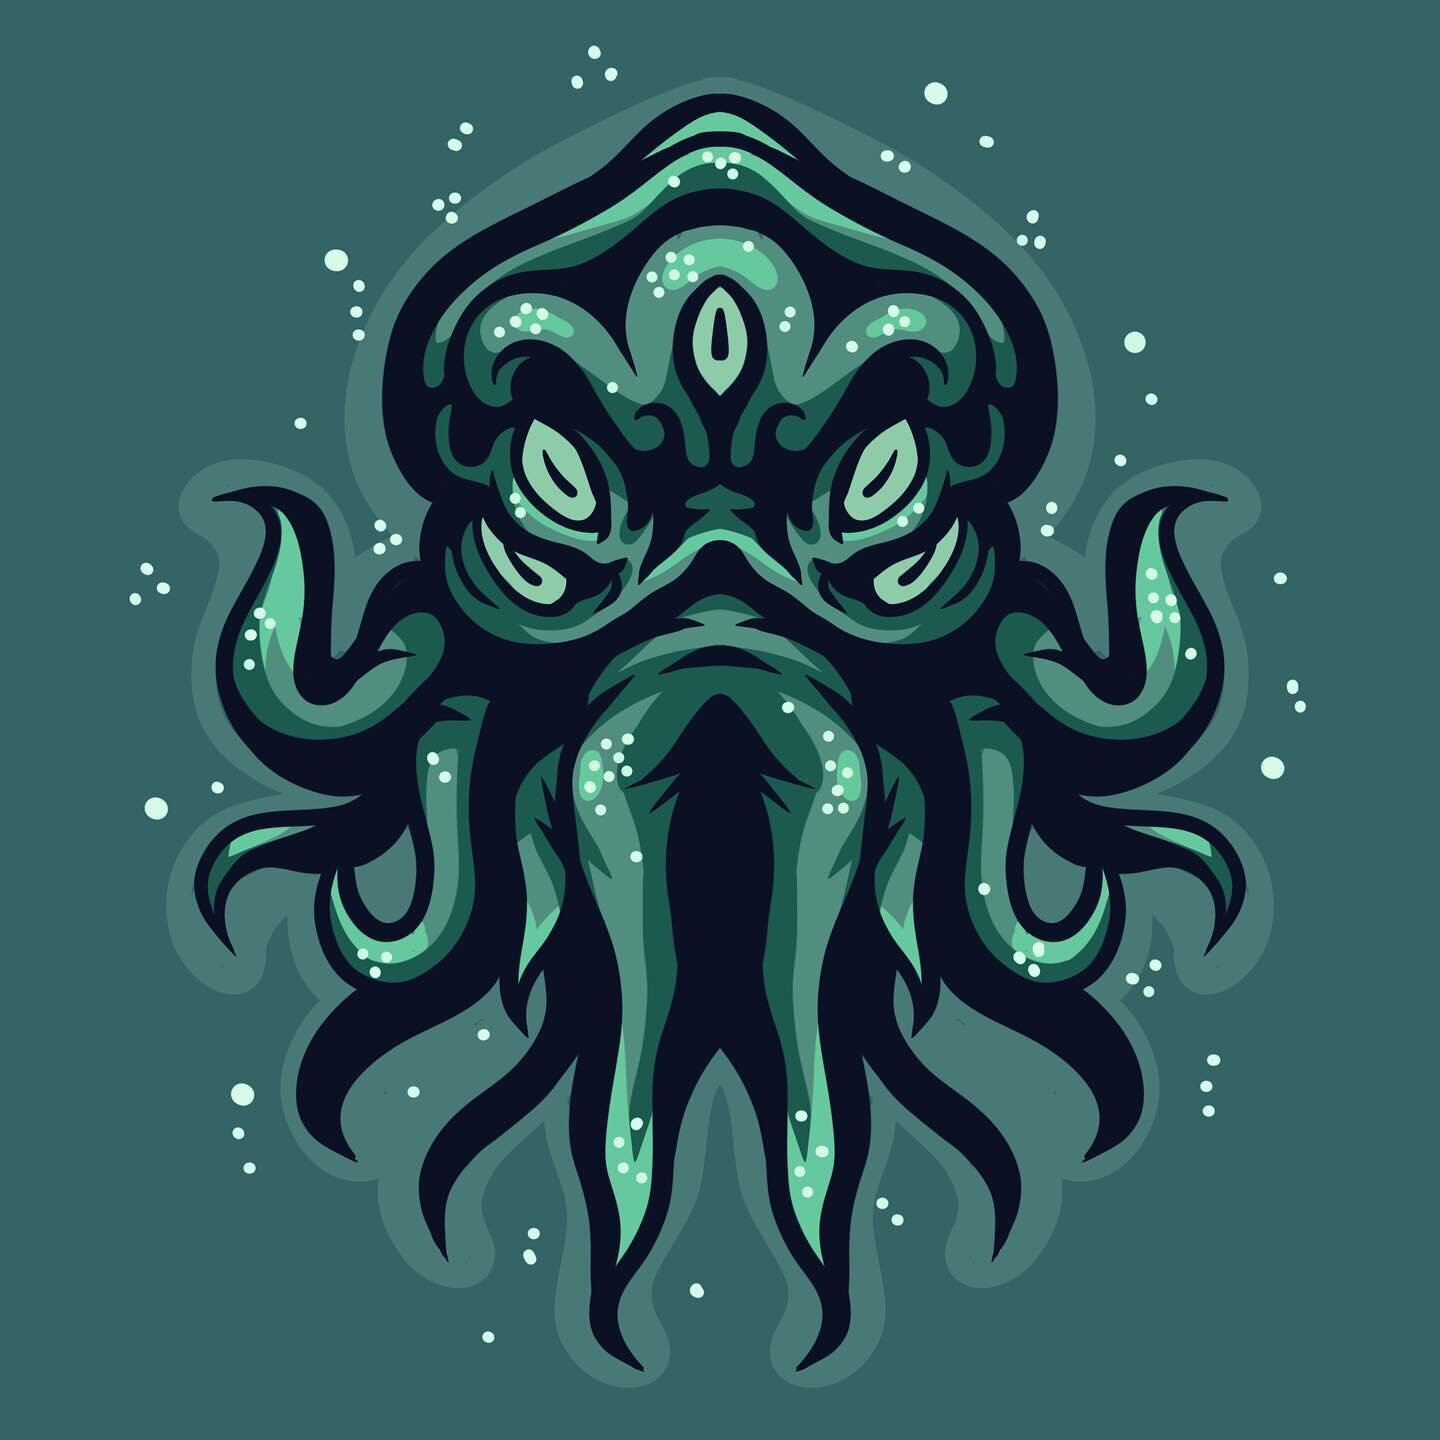 Cthulhu waits dreaming&hellip;.
I had a hard time picking a final color for this one. Swipe and check out the alternates.
.
.
.
.
.
#cthulhu #lovecraft #illustration #digitalillustration #digitalart #design #charaterdesign #stickerart #procreate #ins